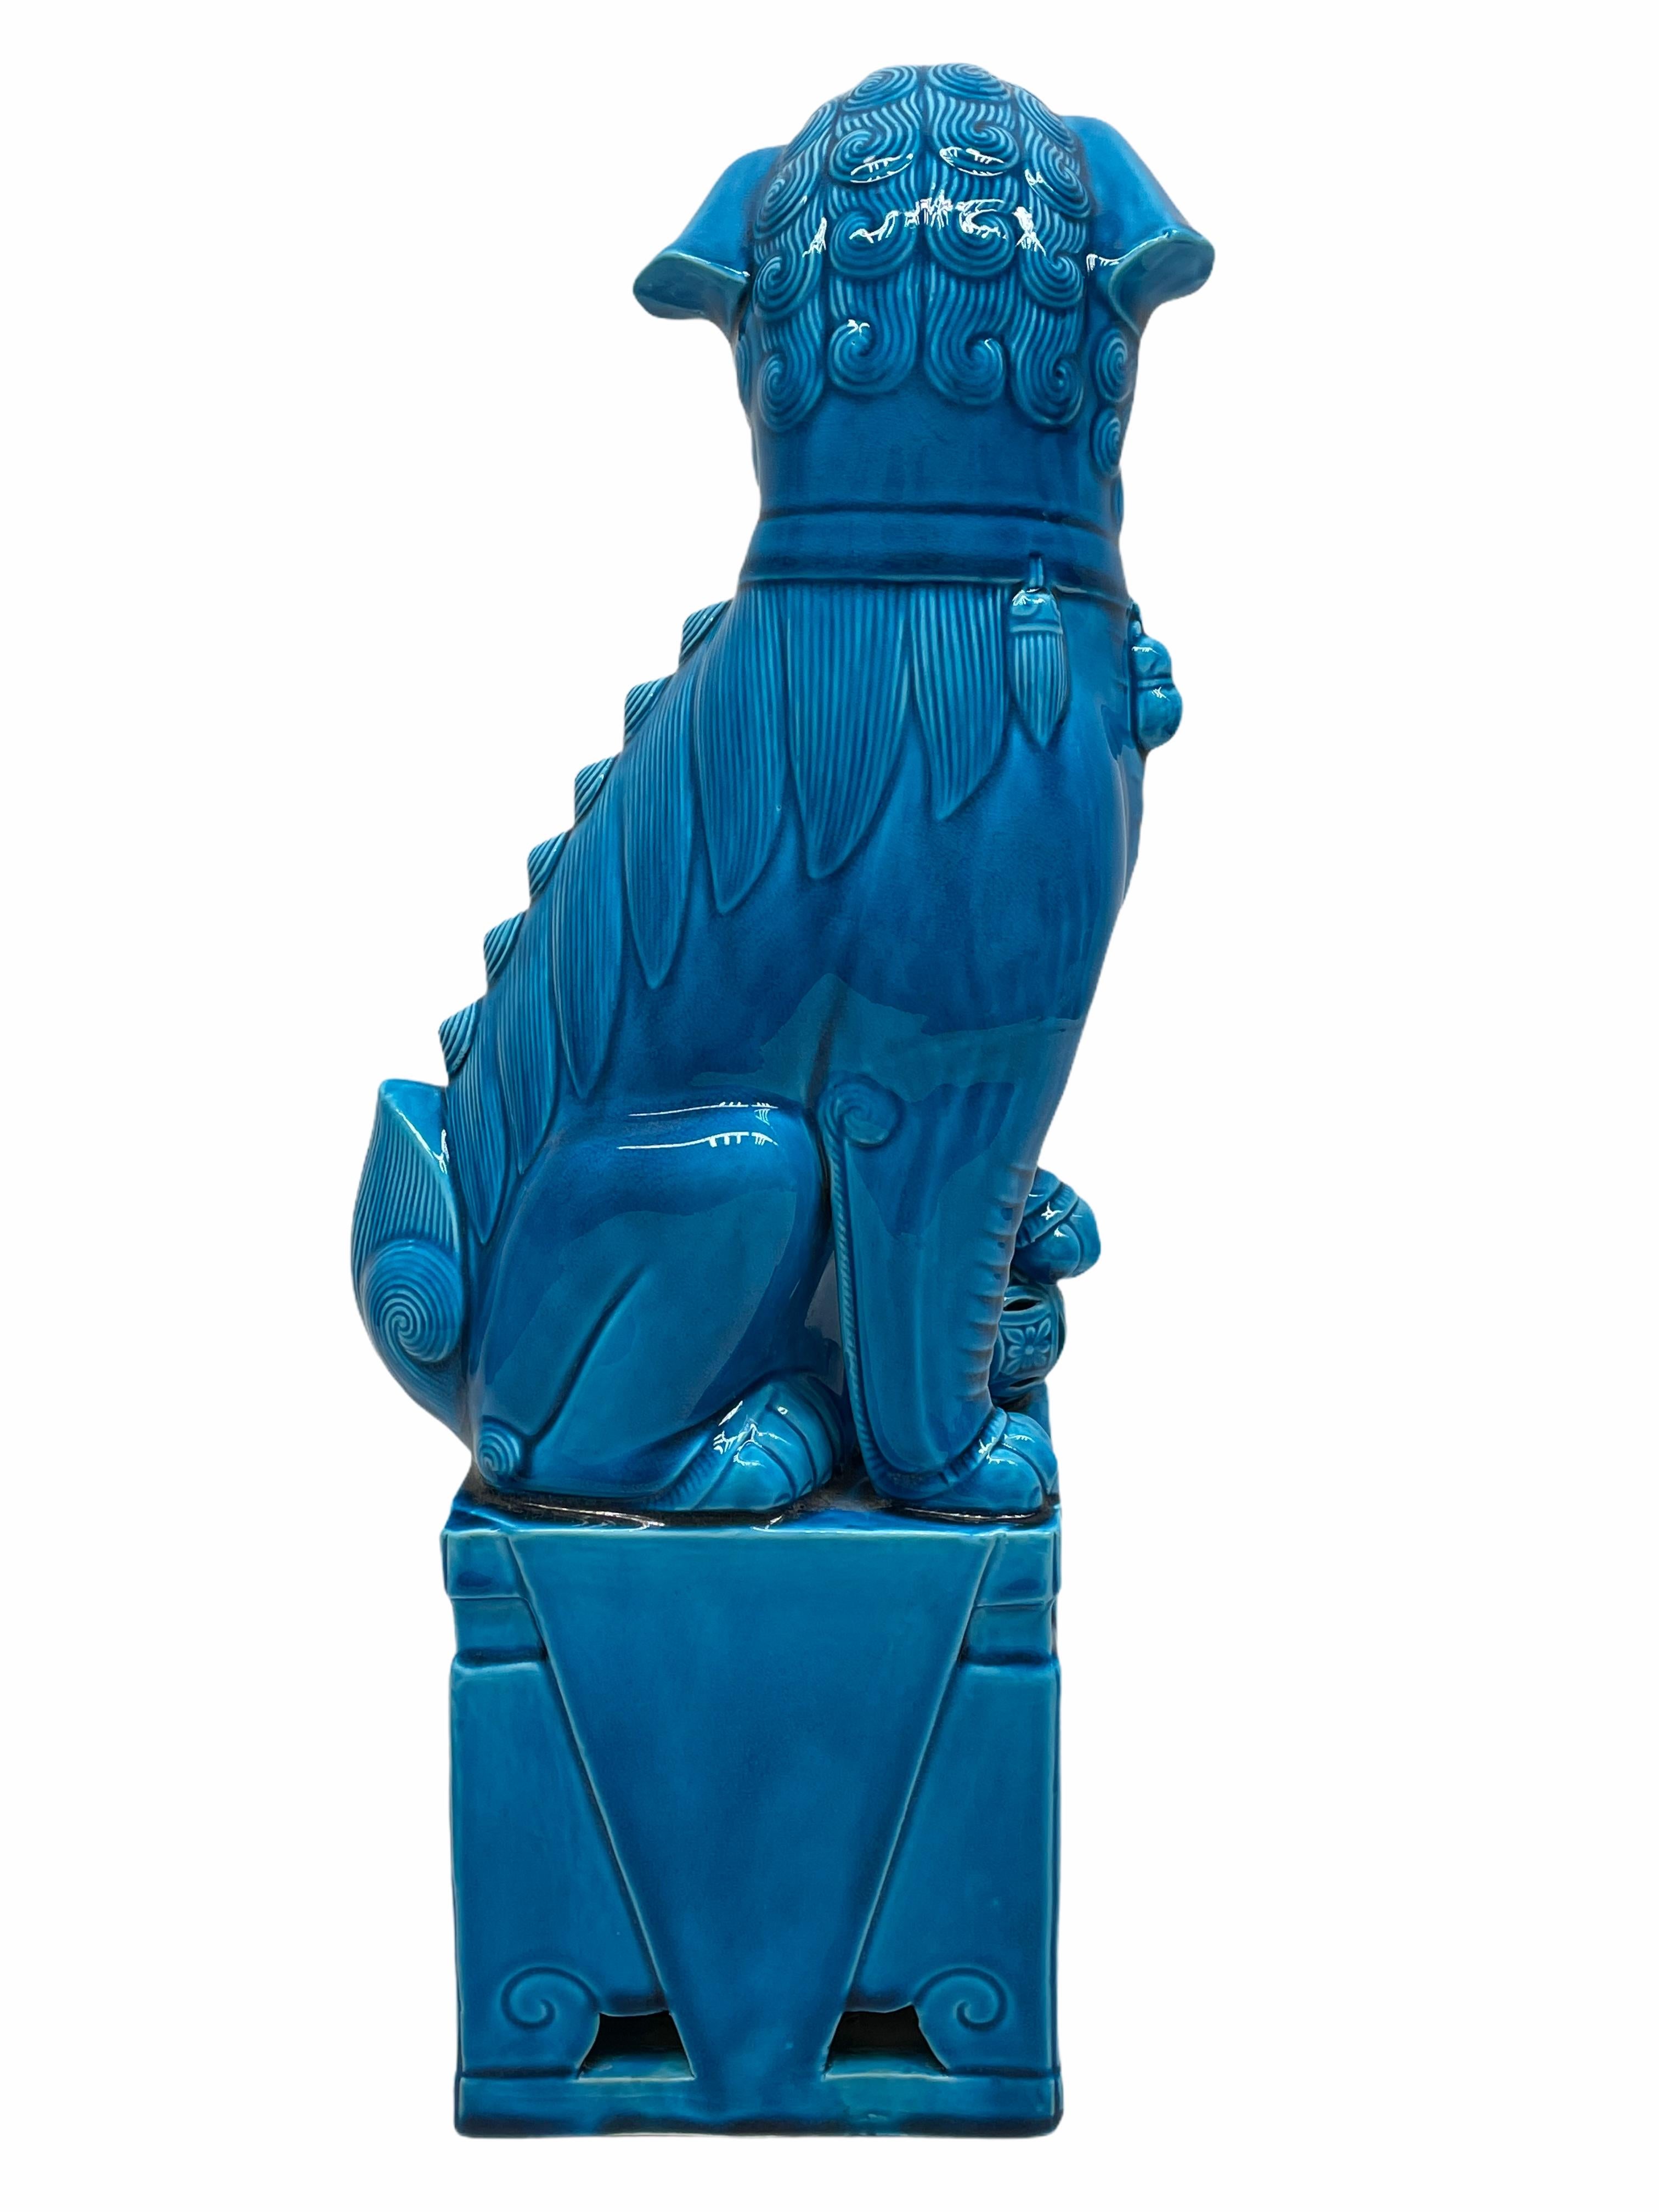 Hollywood Regency Large Decorative Chinese Turquoise Blue Foo Dog Sculpture, 1960s